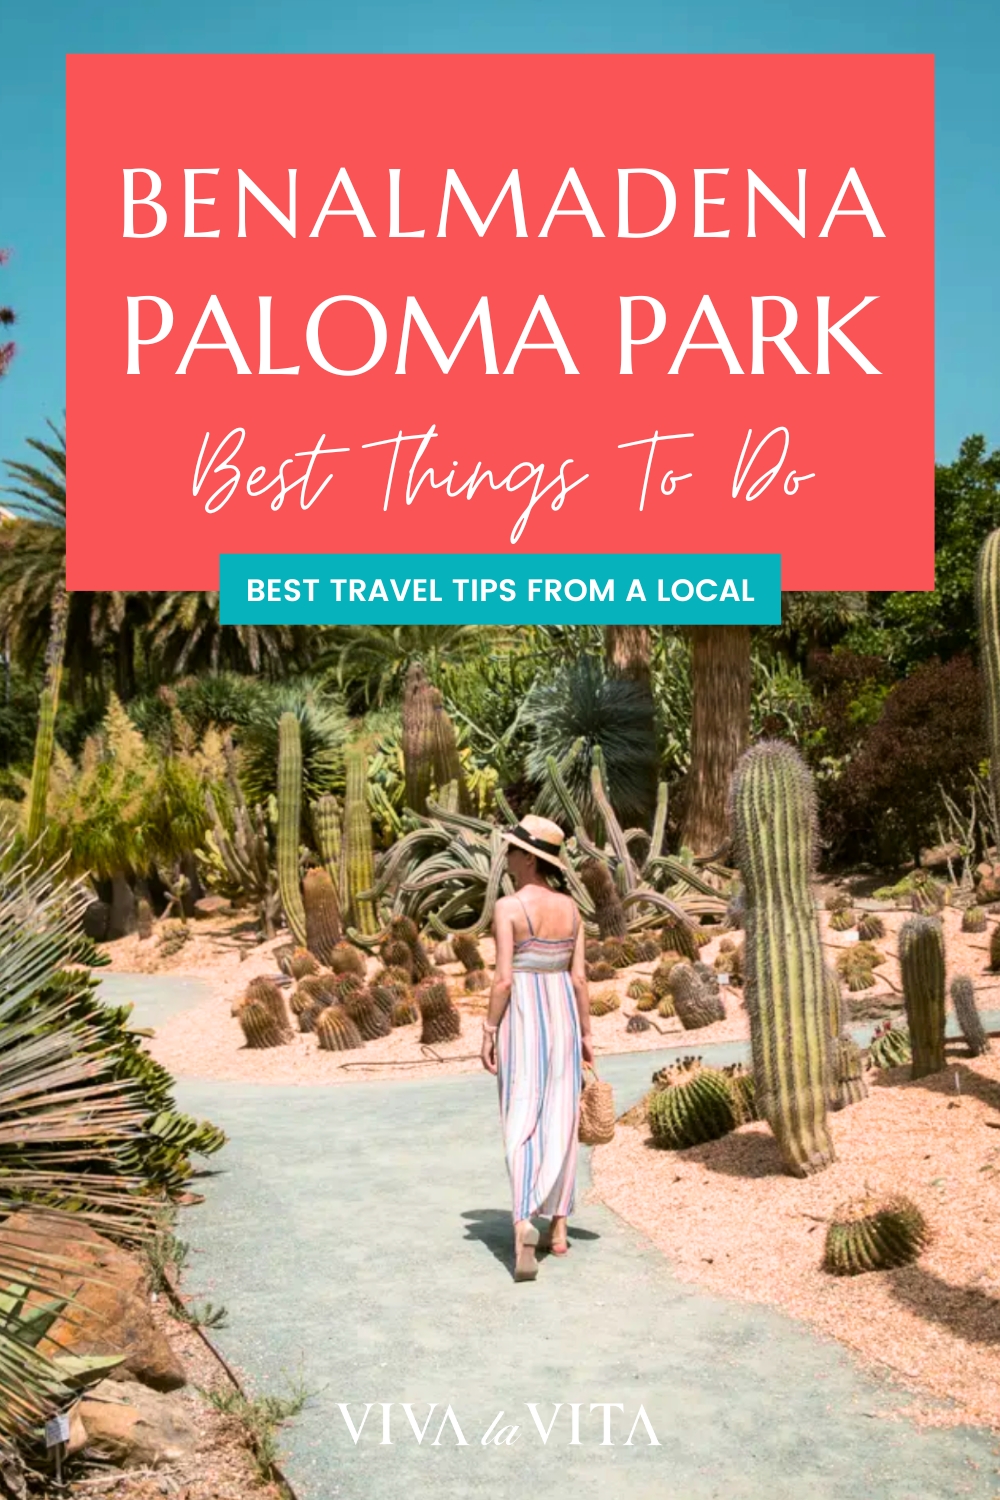 pinterest image showing cactus garden in Paloma Park in Benalmadena, with a headline: Benalmadena Paloma Park Best Things to Do